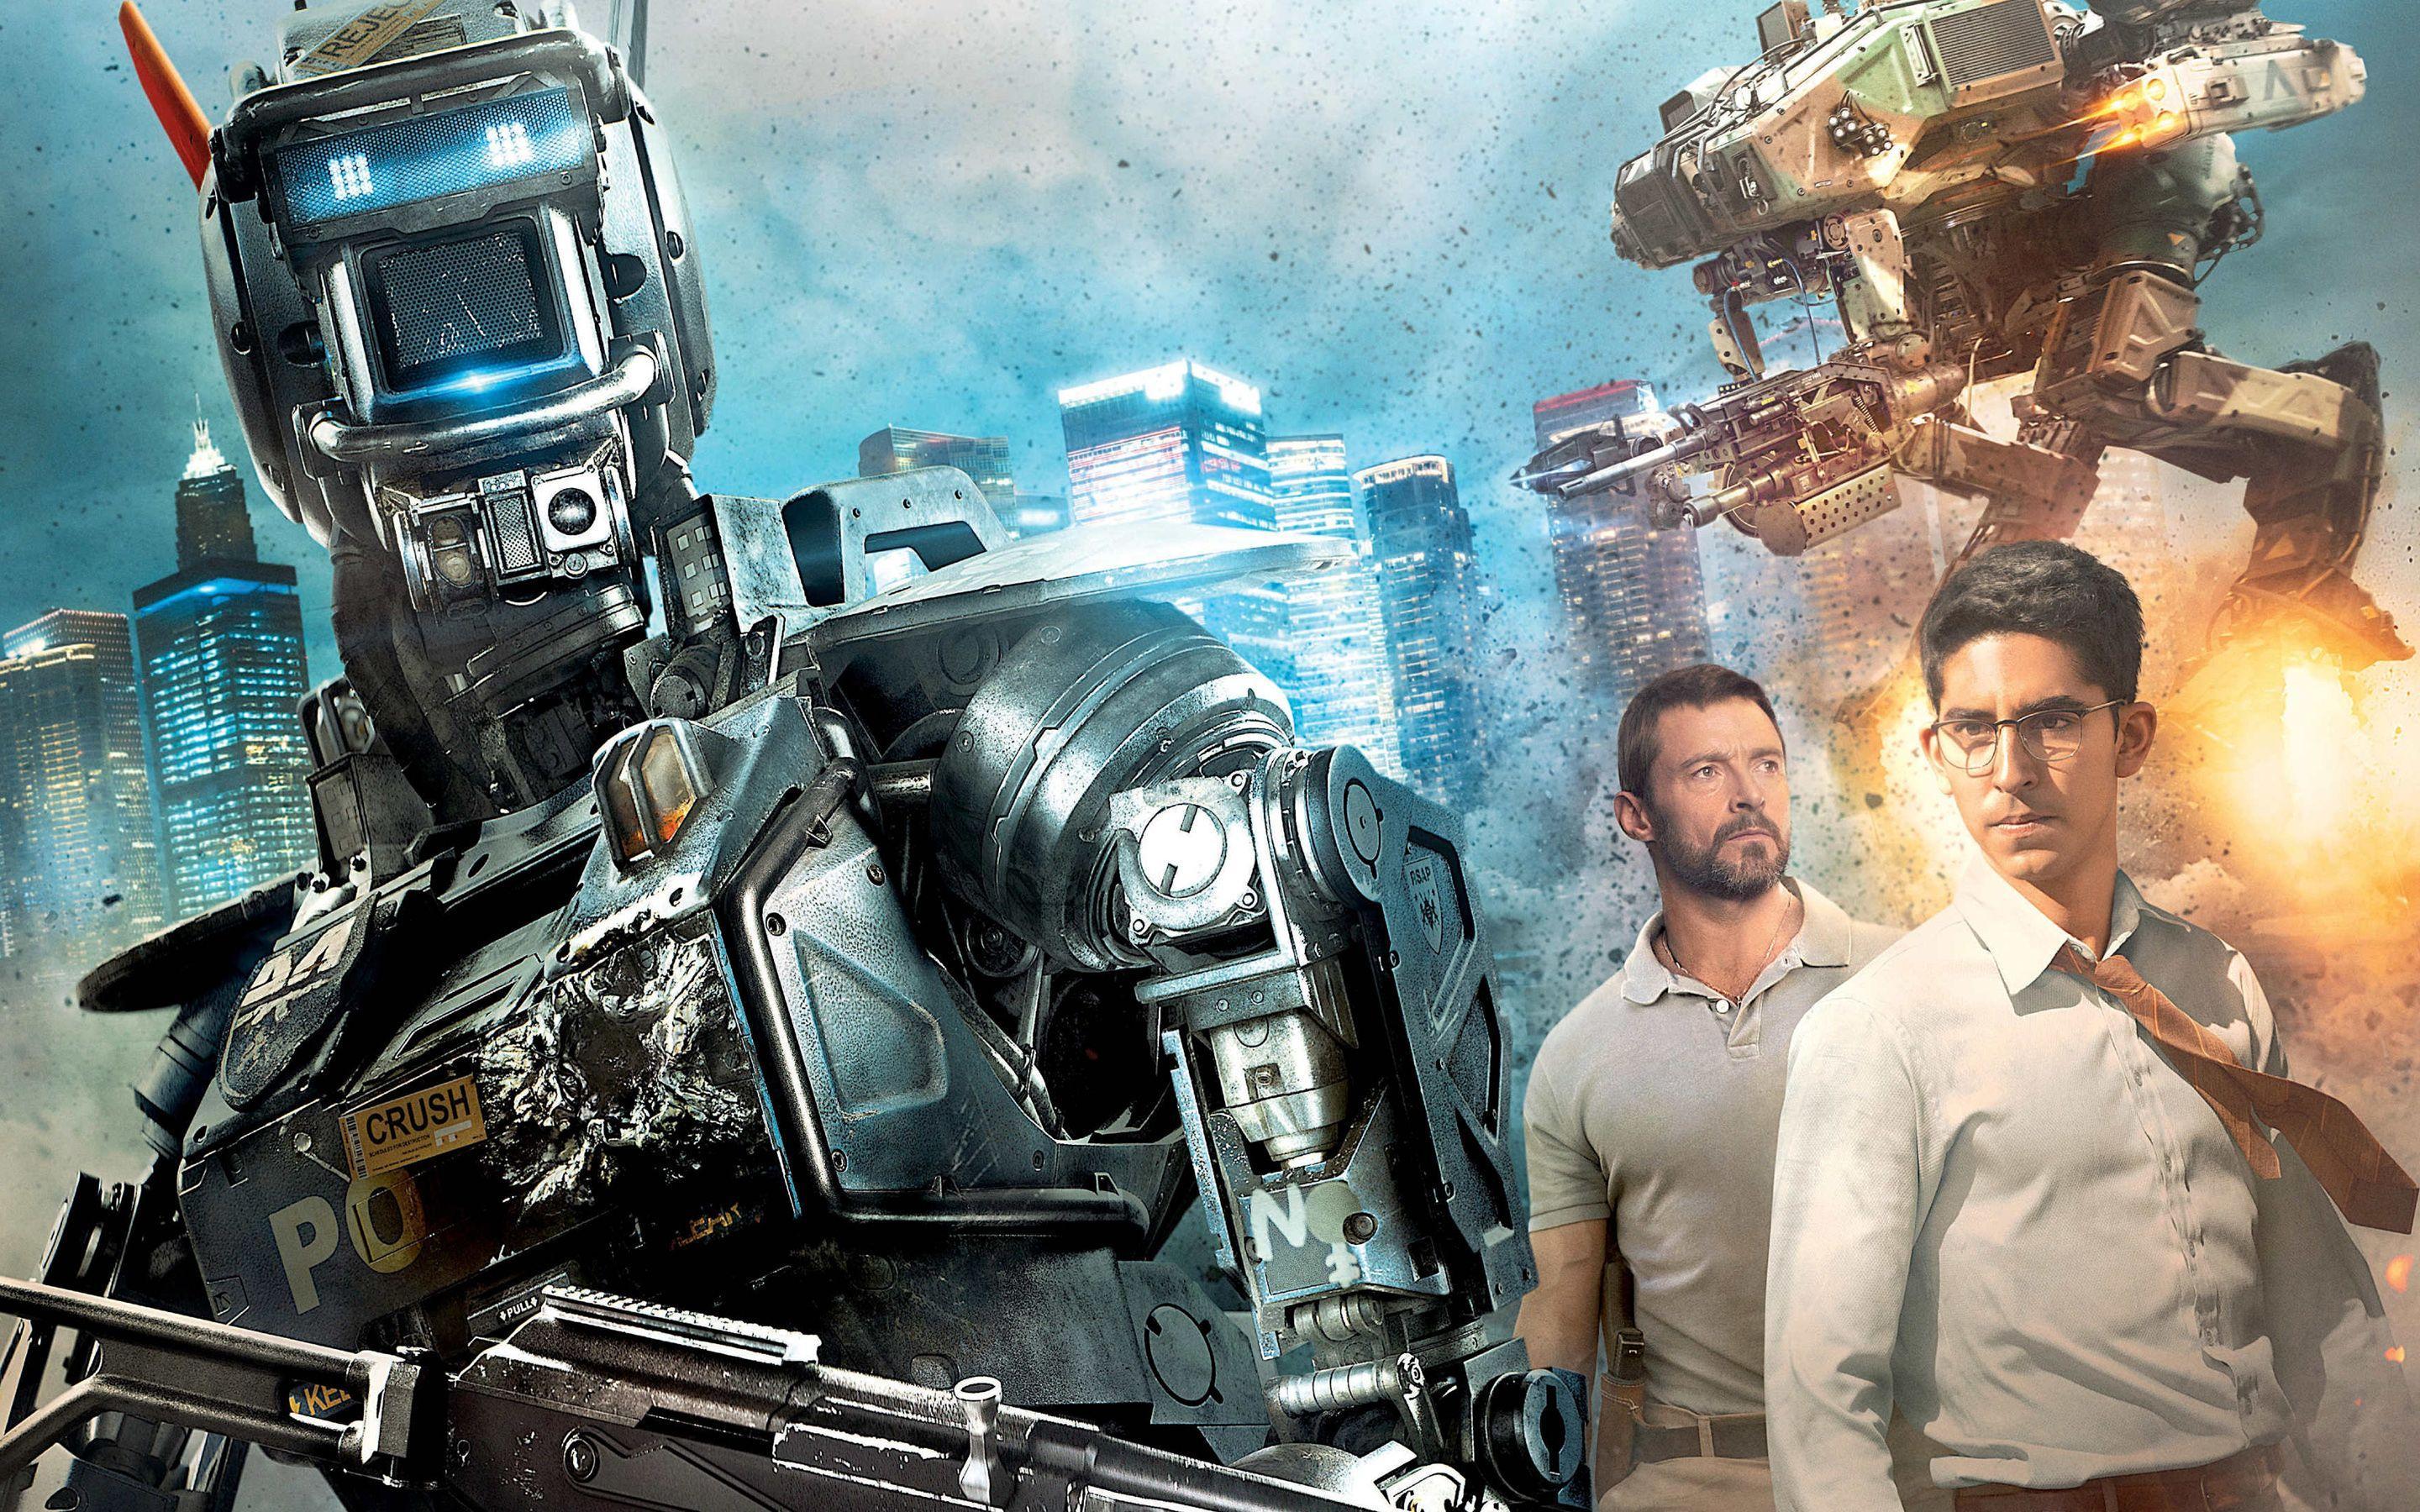 Wallpaper Tagged With CHAPPIE. CHAPPIE HD Wallpaper